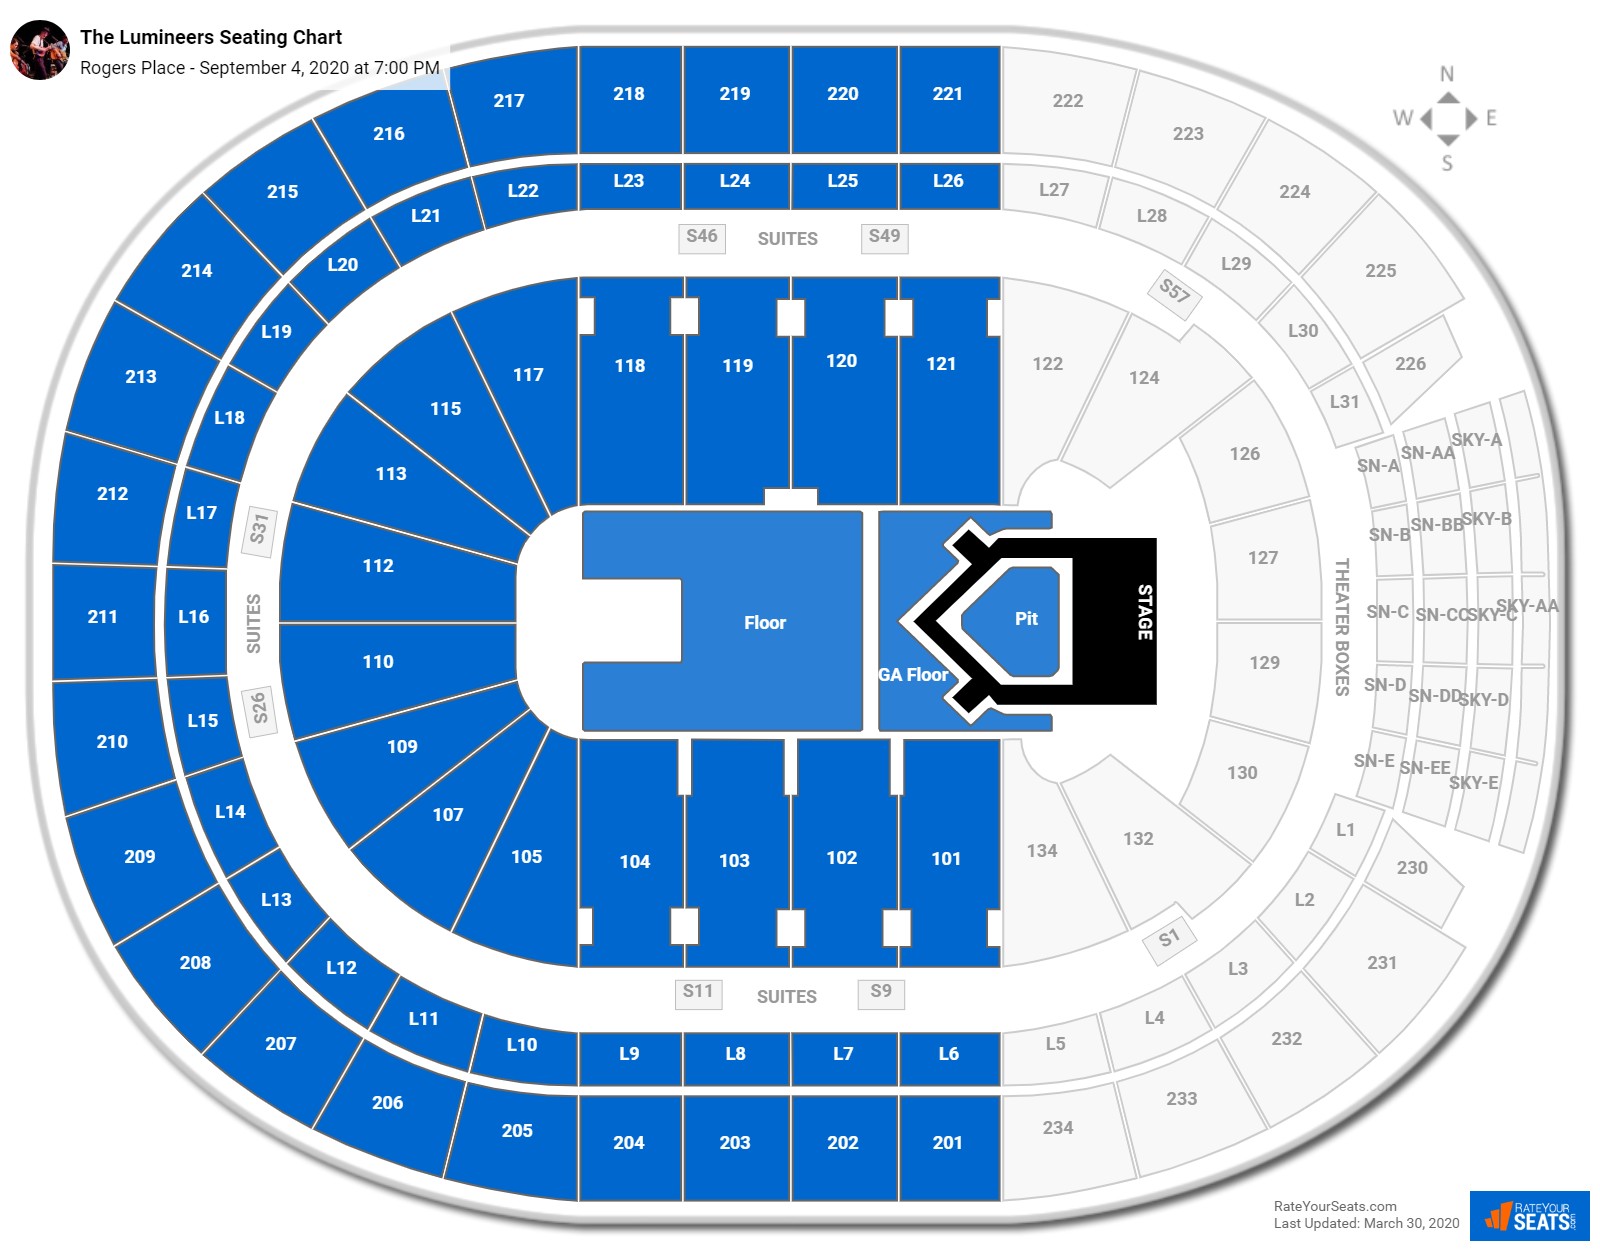 Rogers Place Seating Charts for Concerts